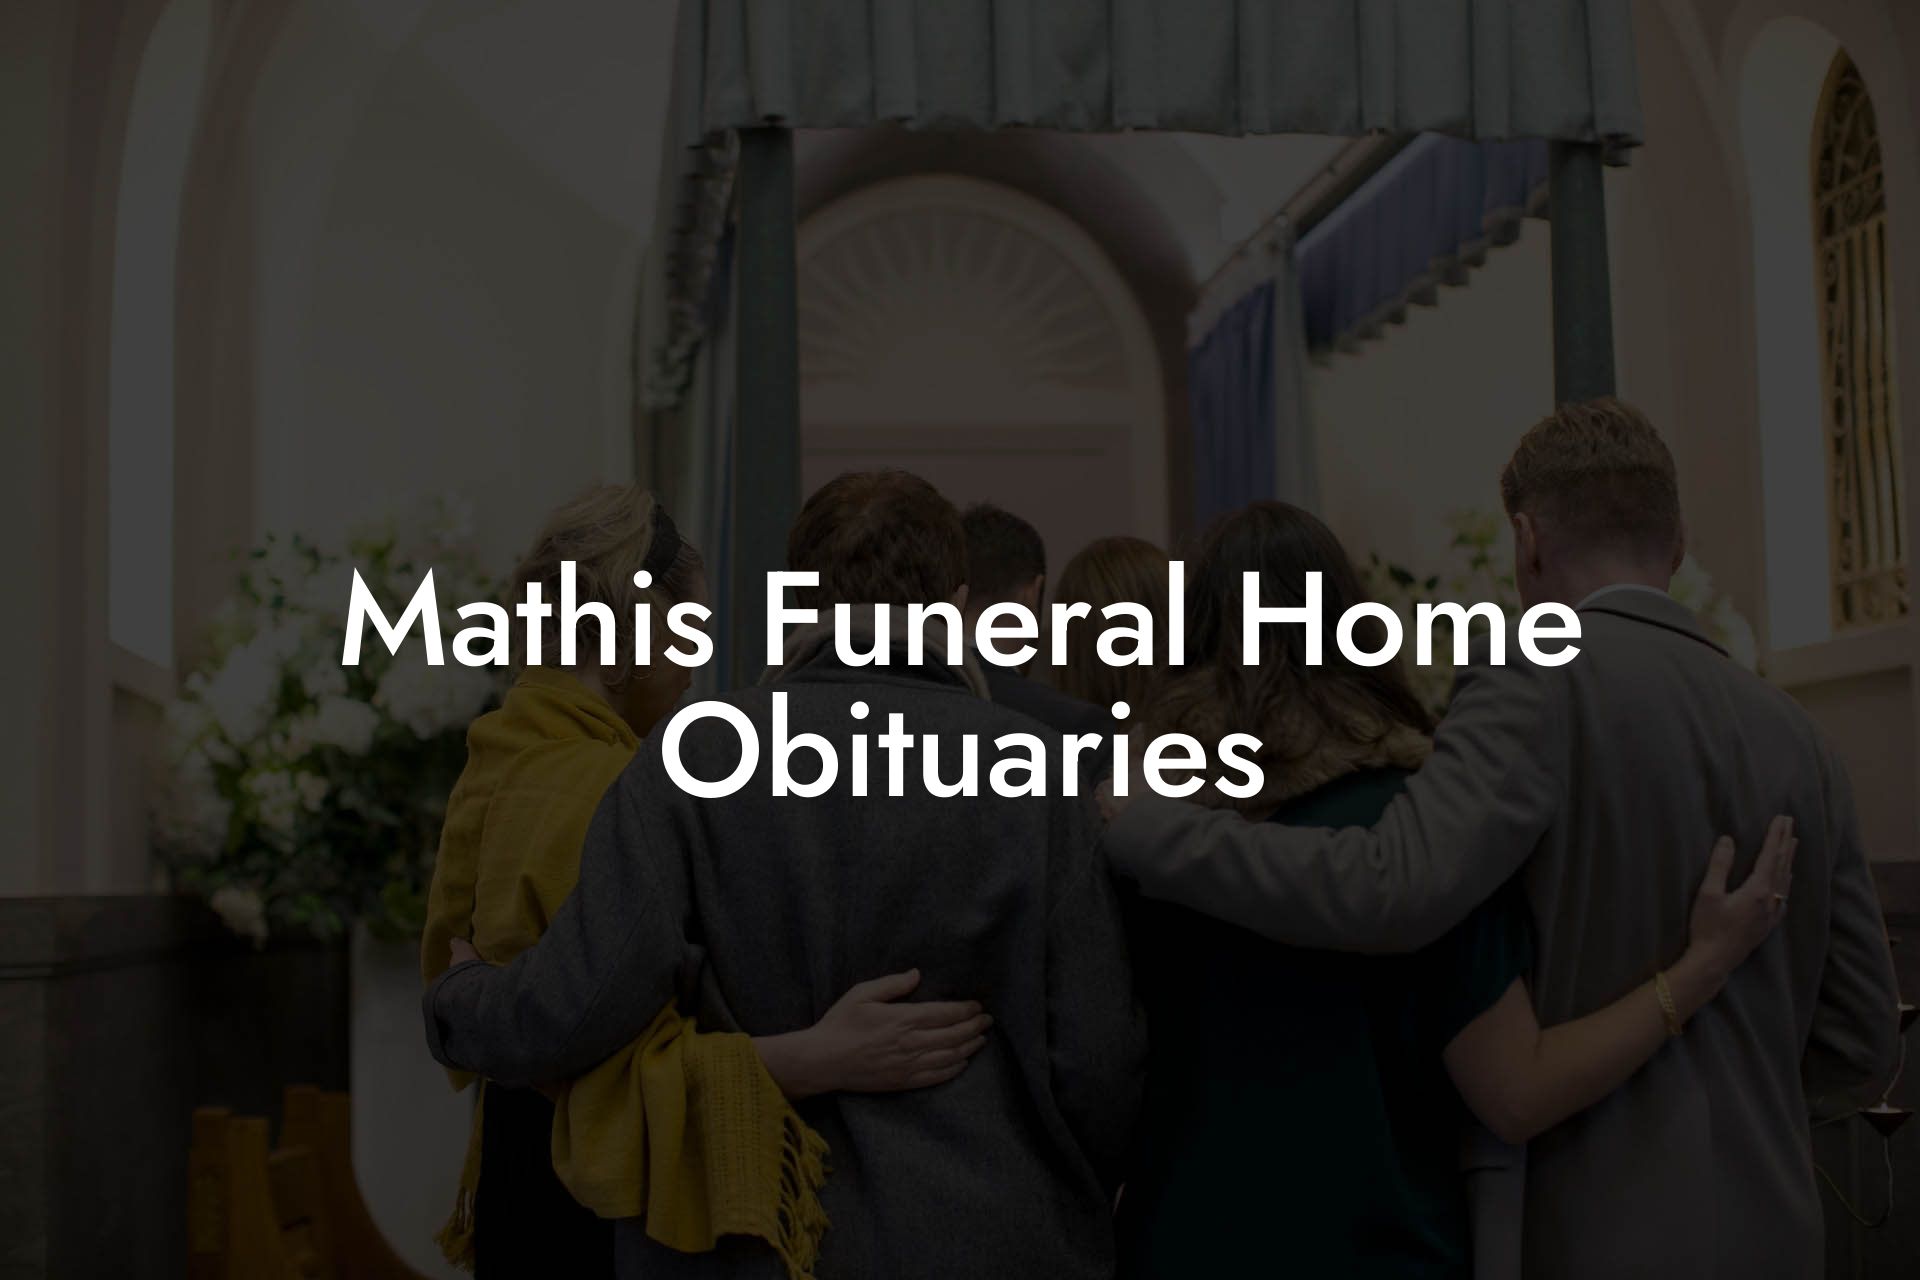 Mathis Funeral Home Obituaries